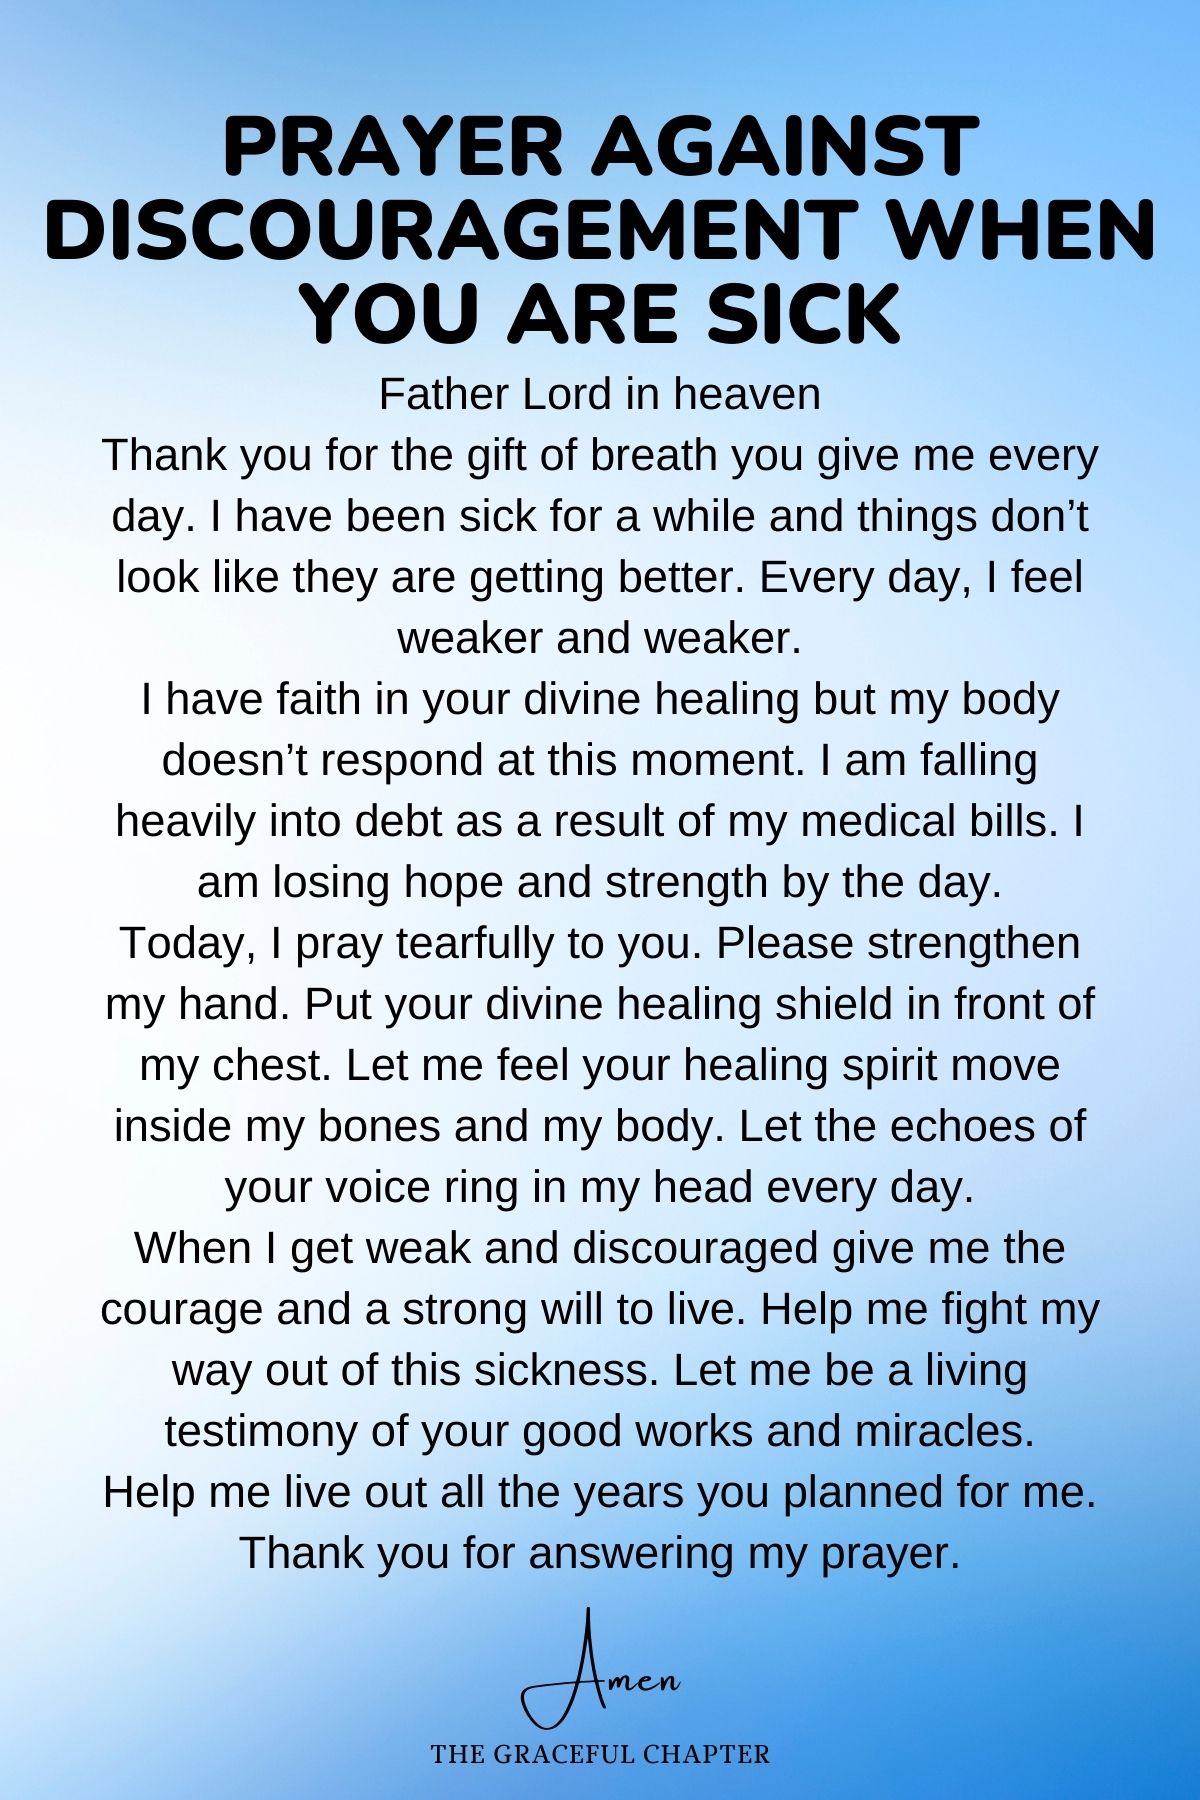 Prayer against discouragement when you are sick